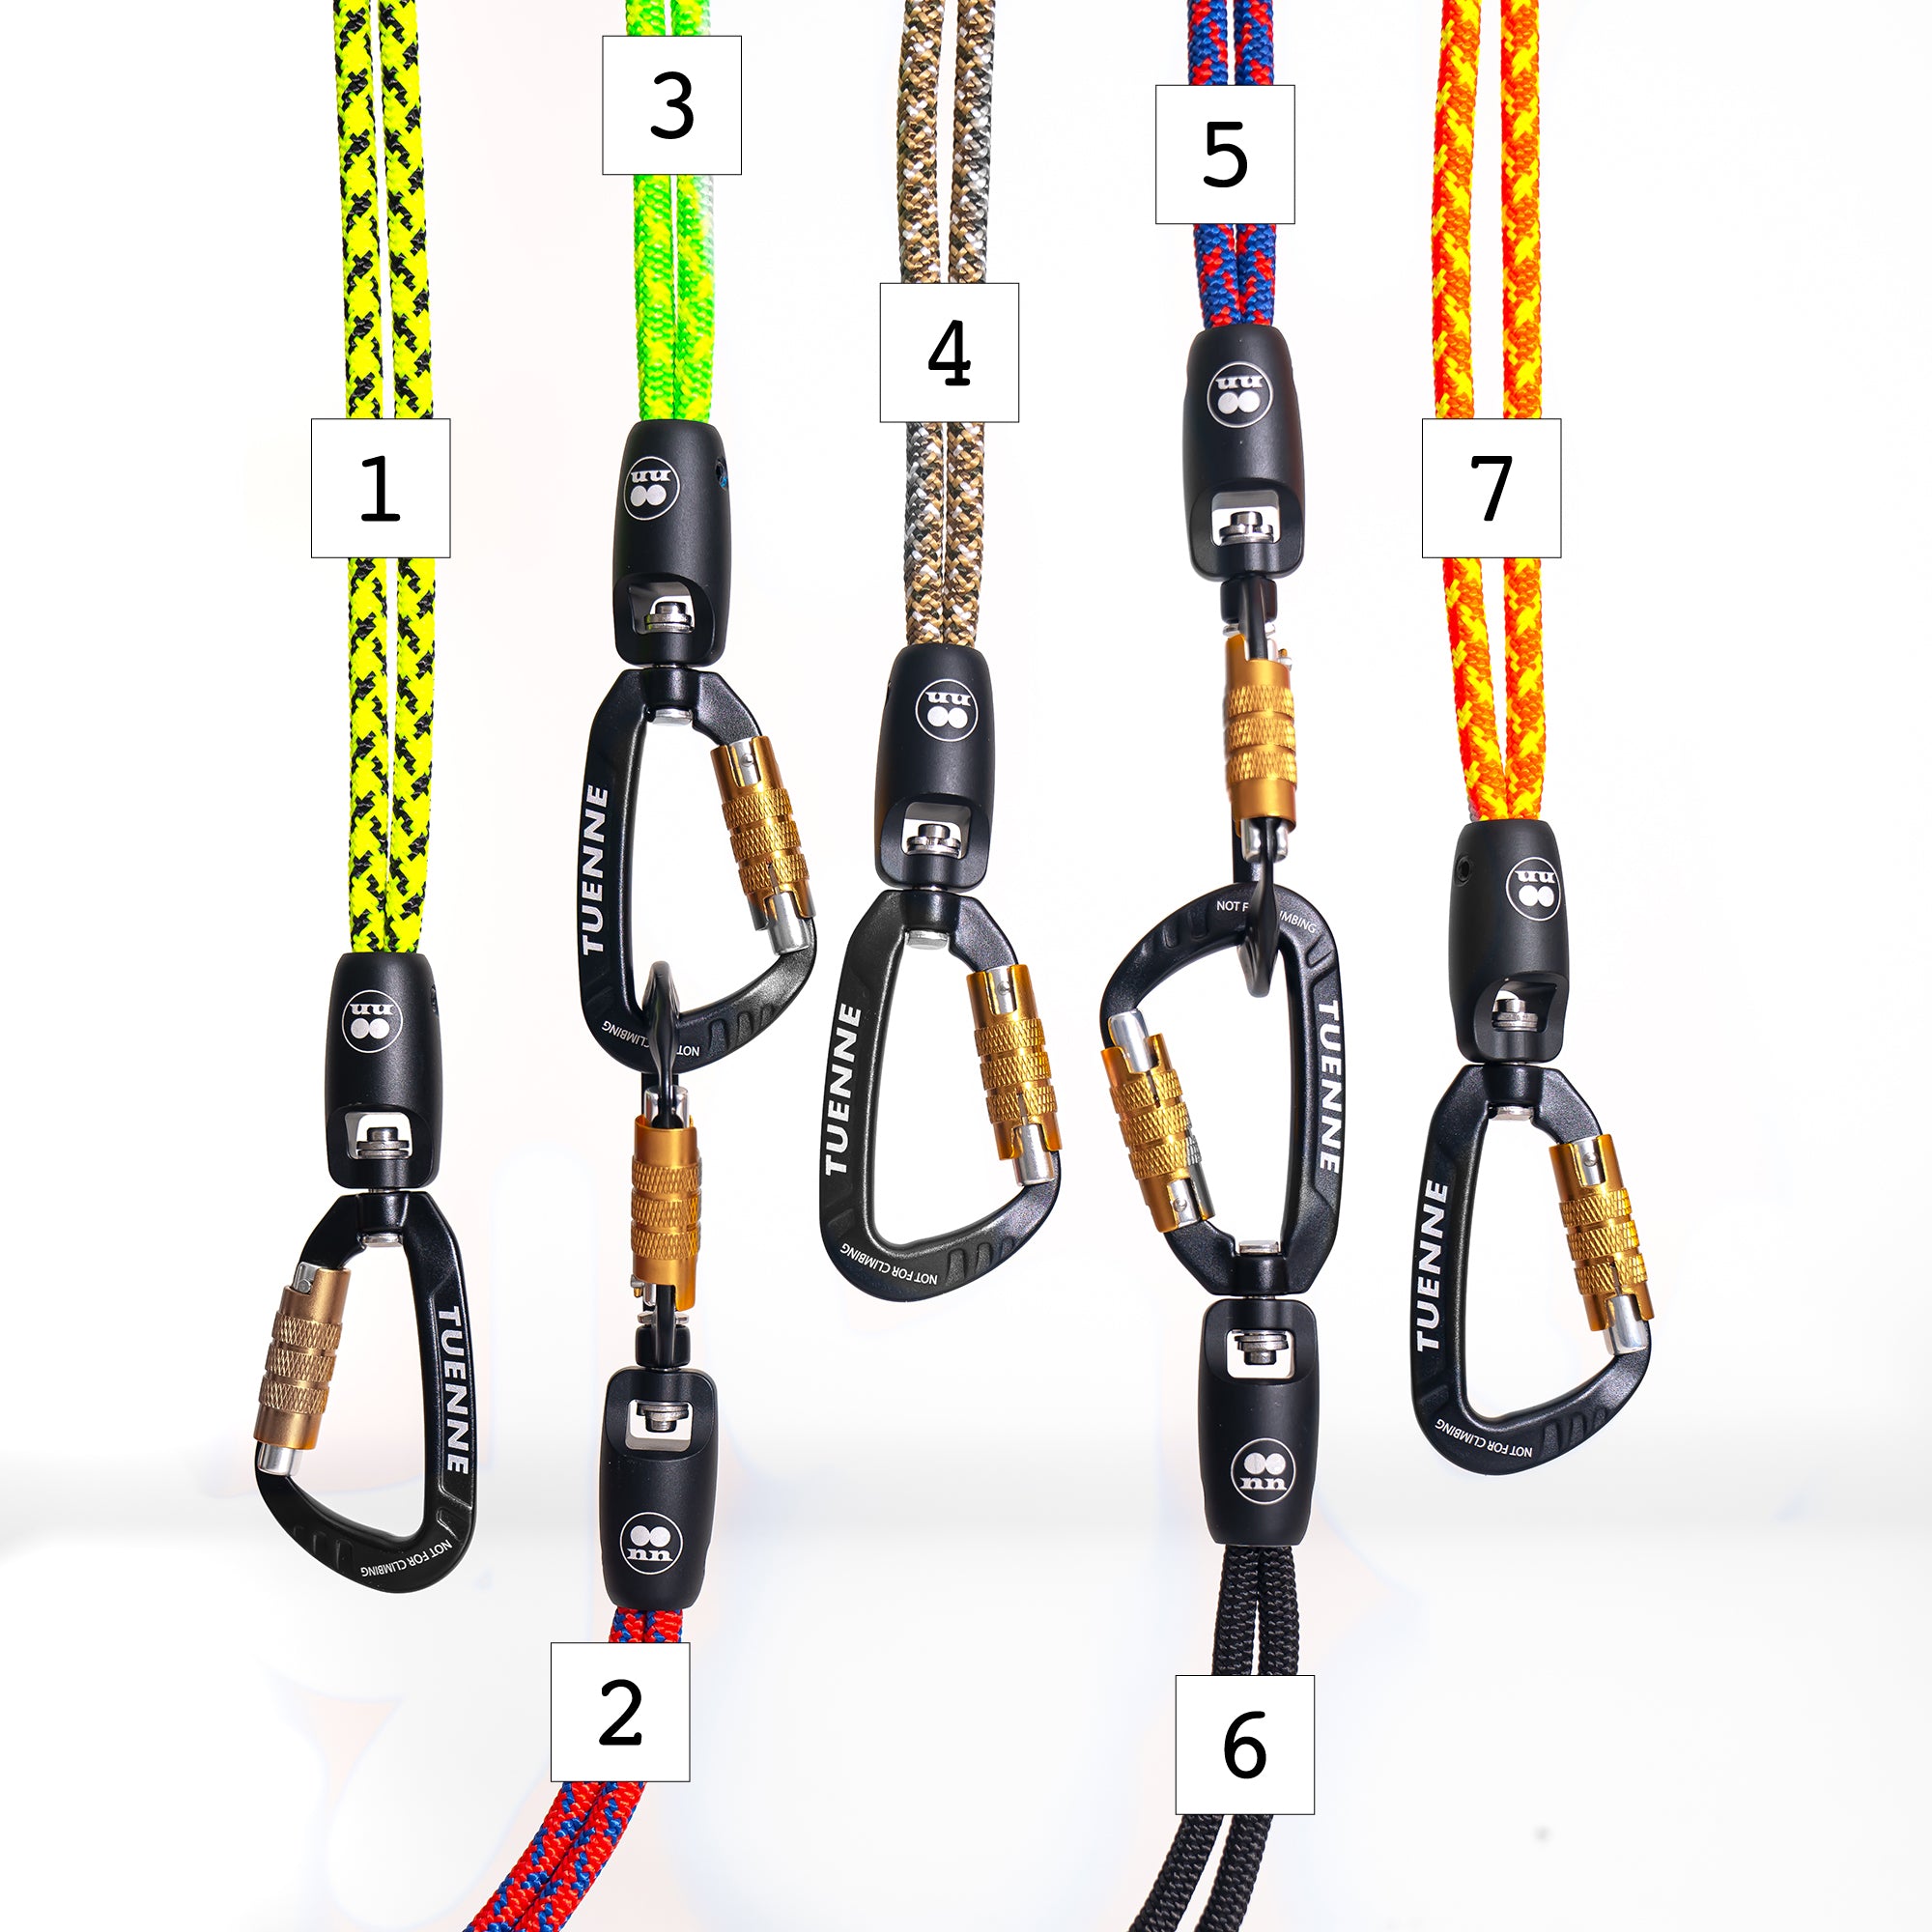 The World's Most Interesting Lanyard – Tuenne